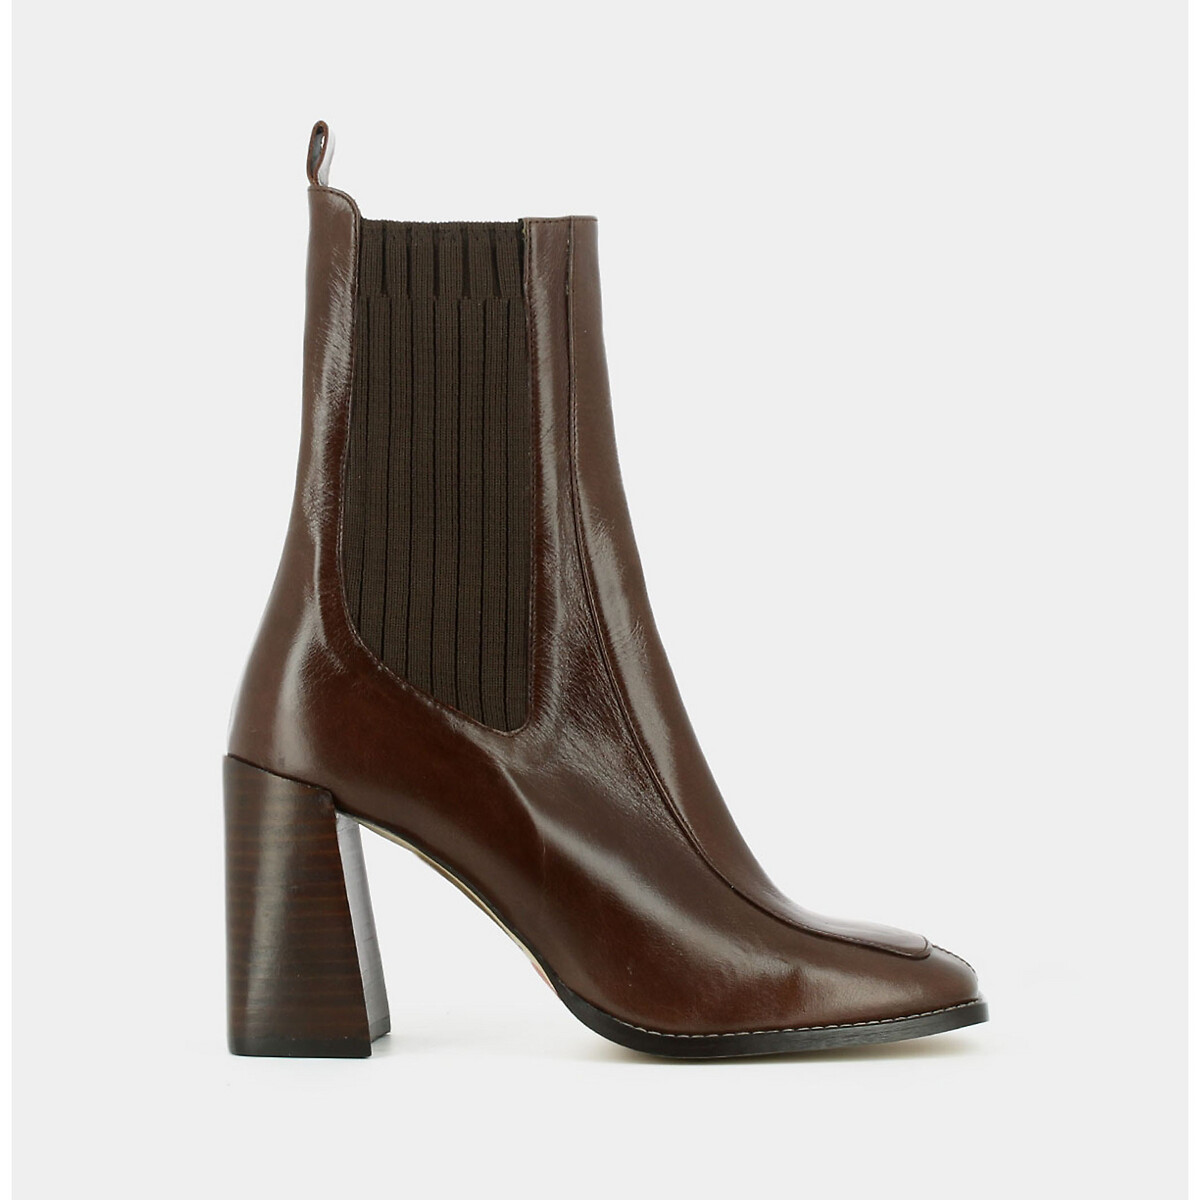 Vanti Ankle Boots in Grained Leather